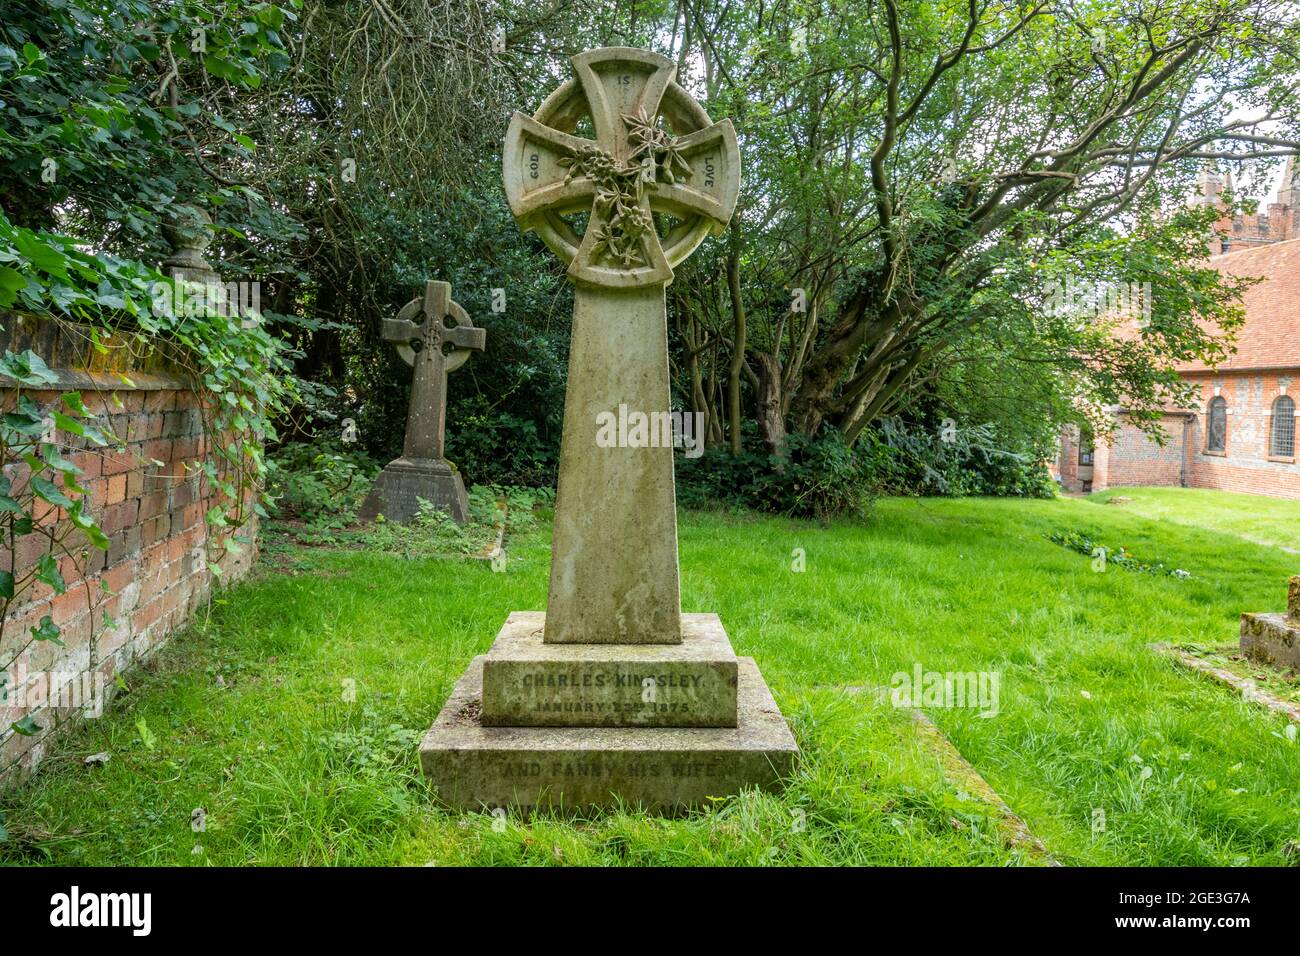 Grave of Charles Kingsley, author and rector at St Mary's Church in Eversley, a Hampshire village, England, UK Stock Photo